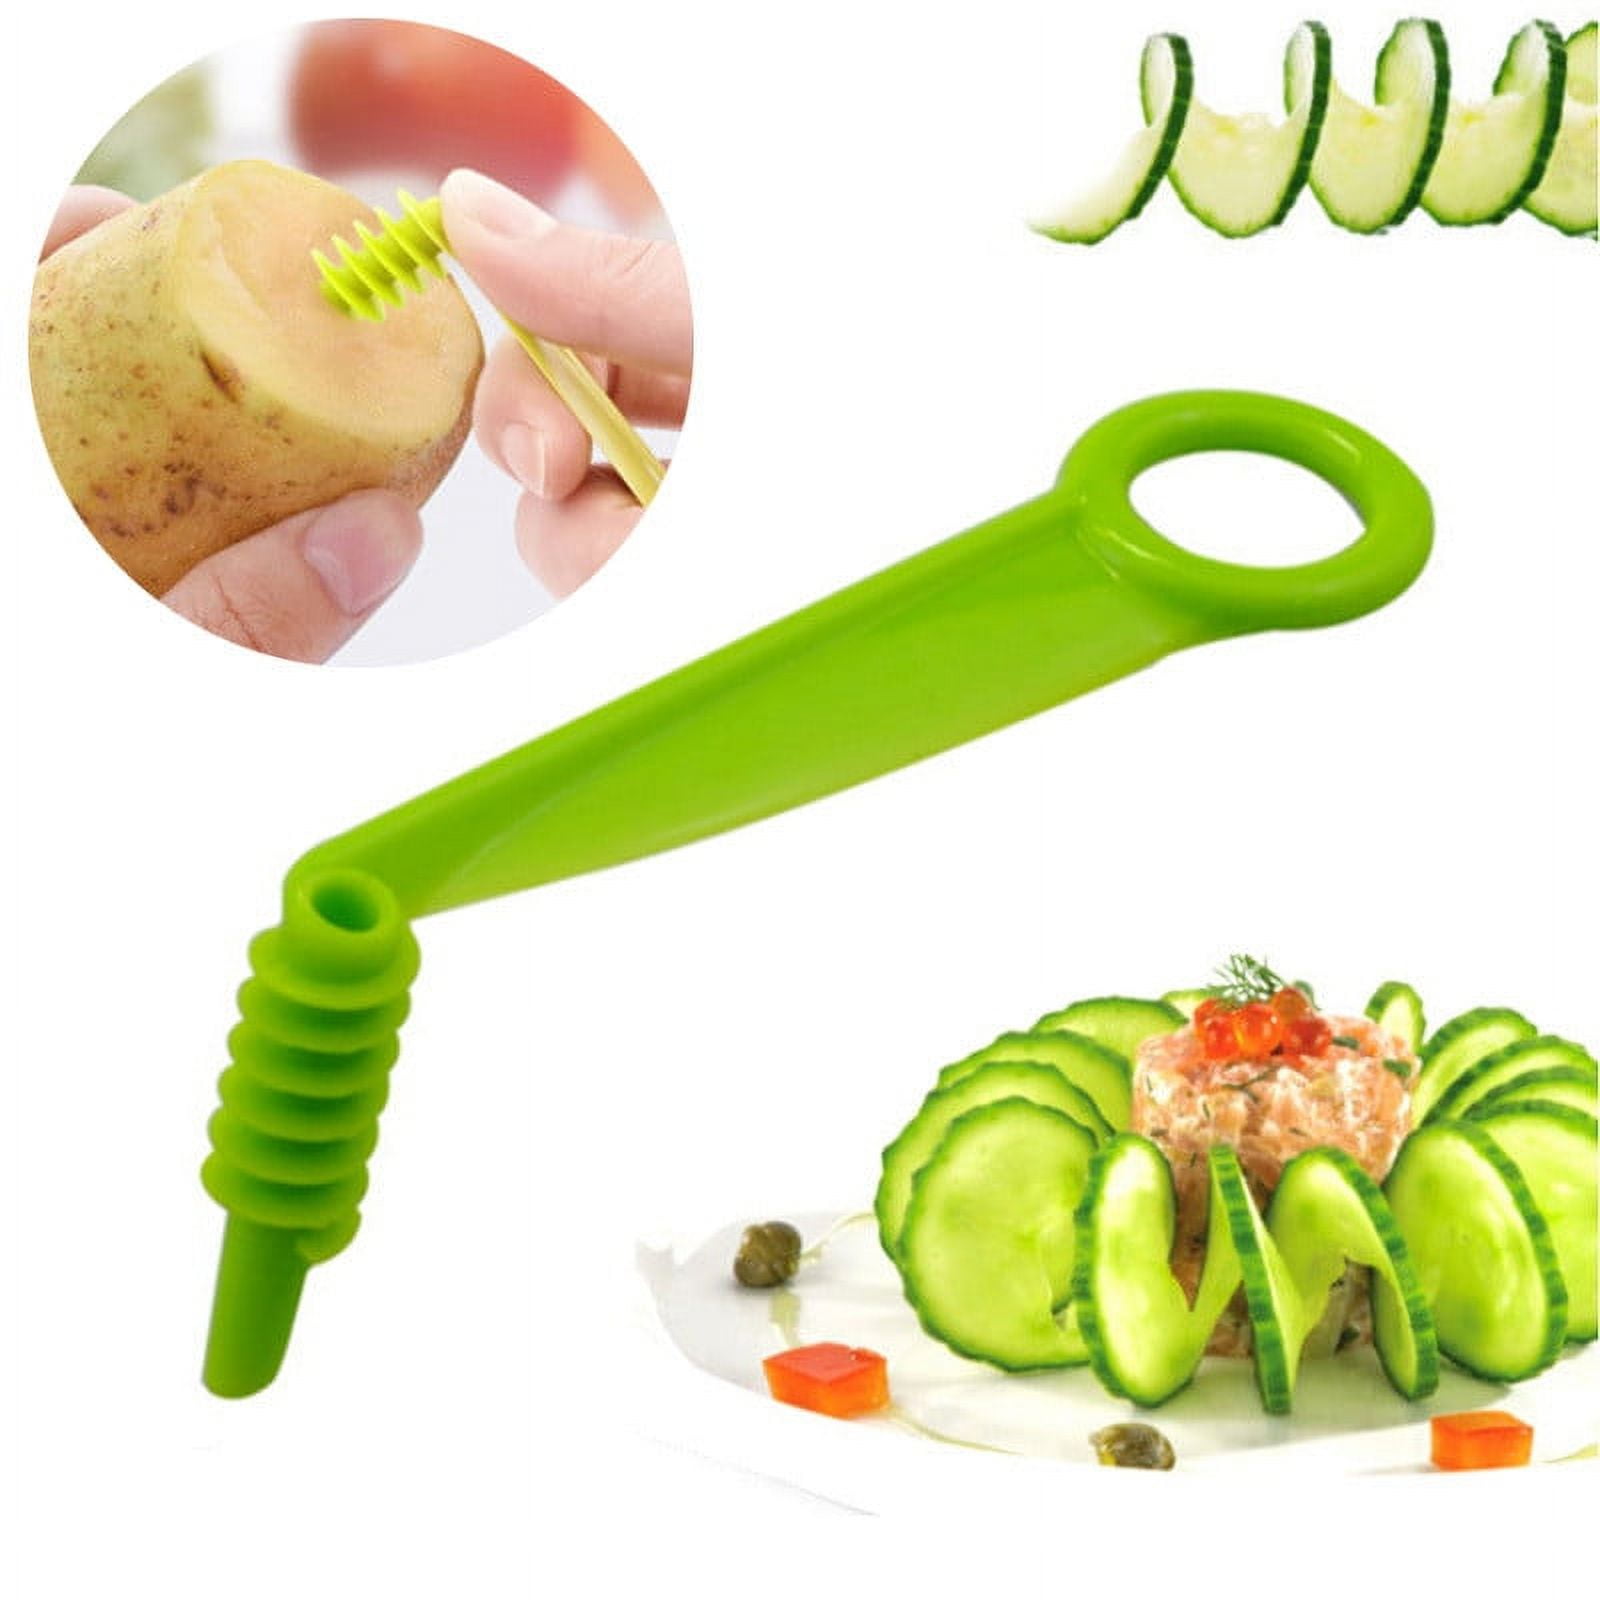 Spiral Cutter For Vegetables With 3 Blades 17851097 DEXAM